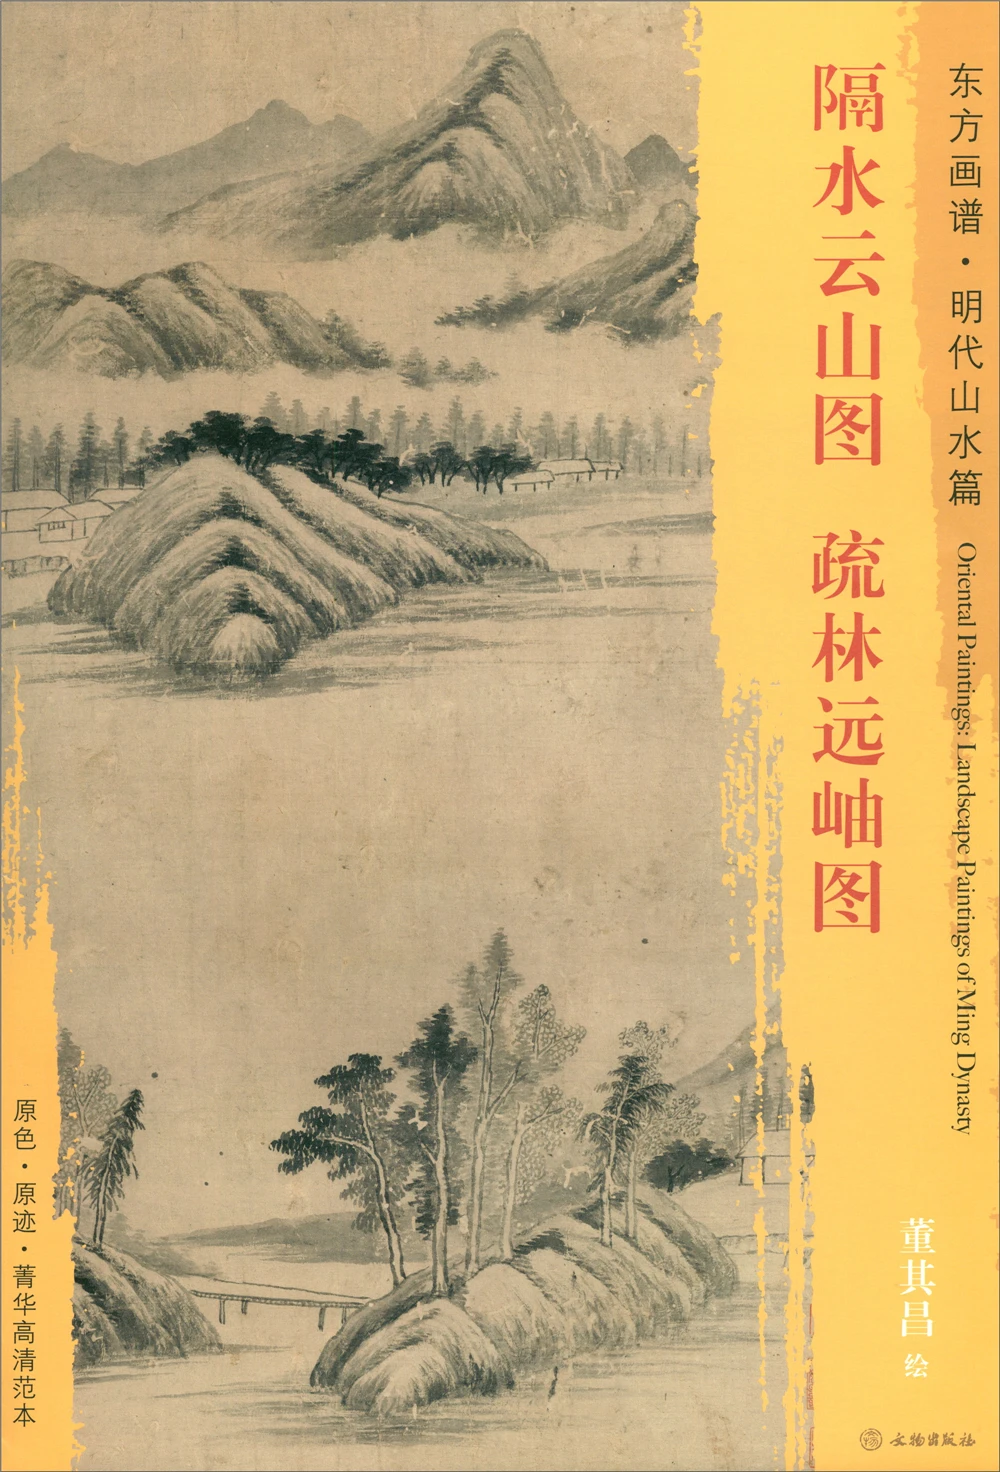 

Oriental Paintings. Landscapes of the Ming Dynasty Sketch book Art Drawing high-quality Painting copyBook for training